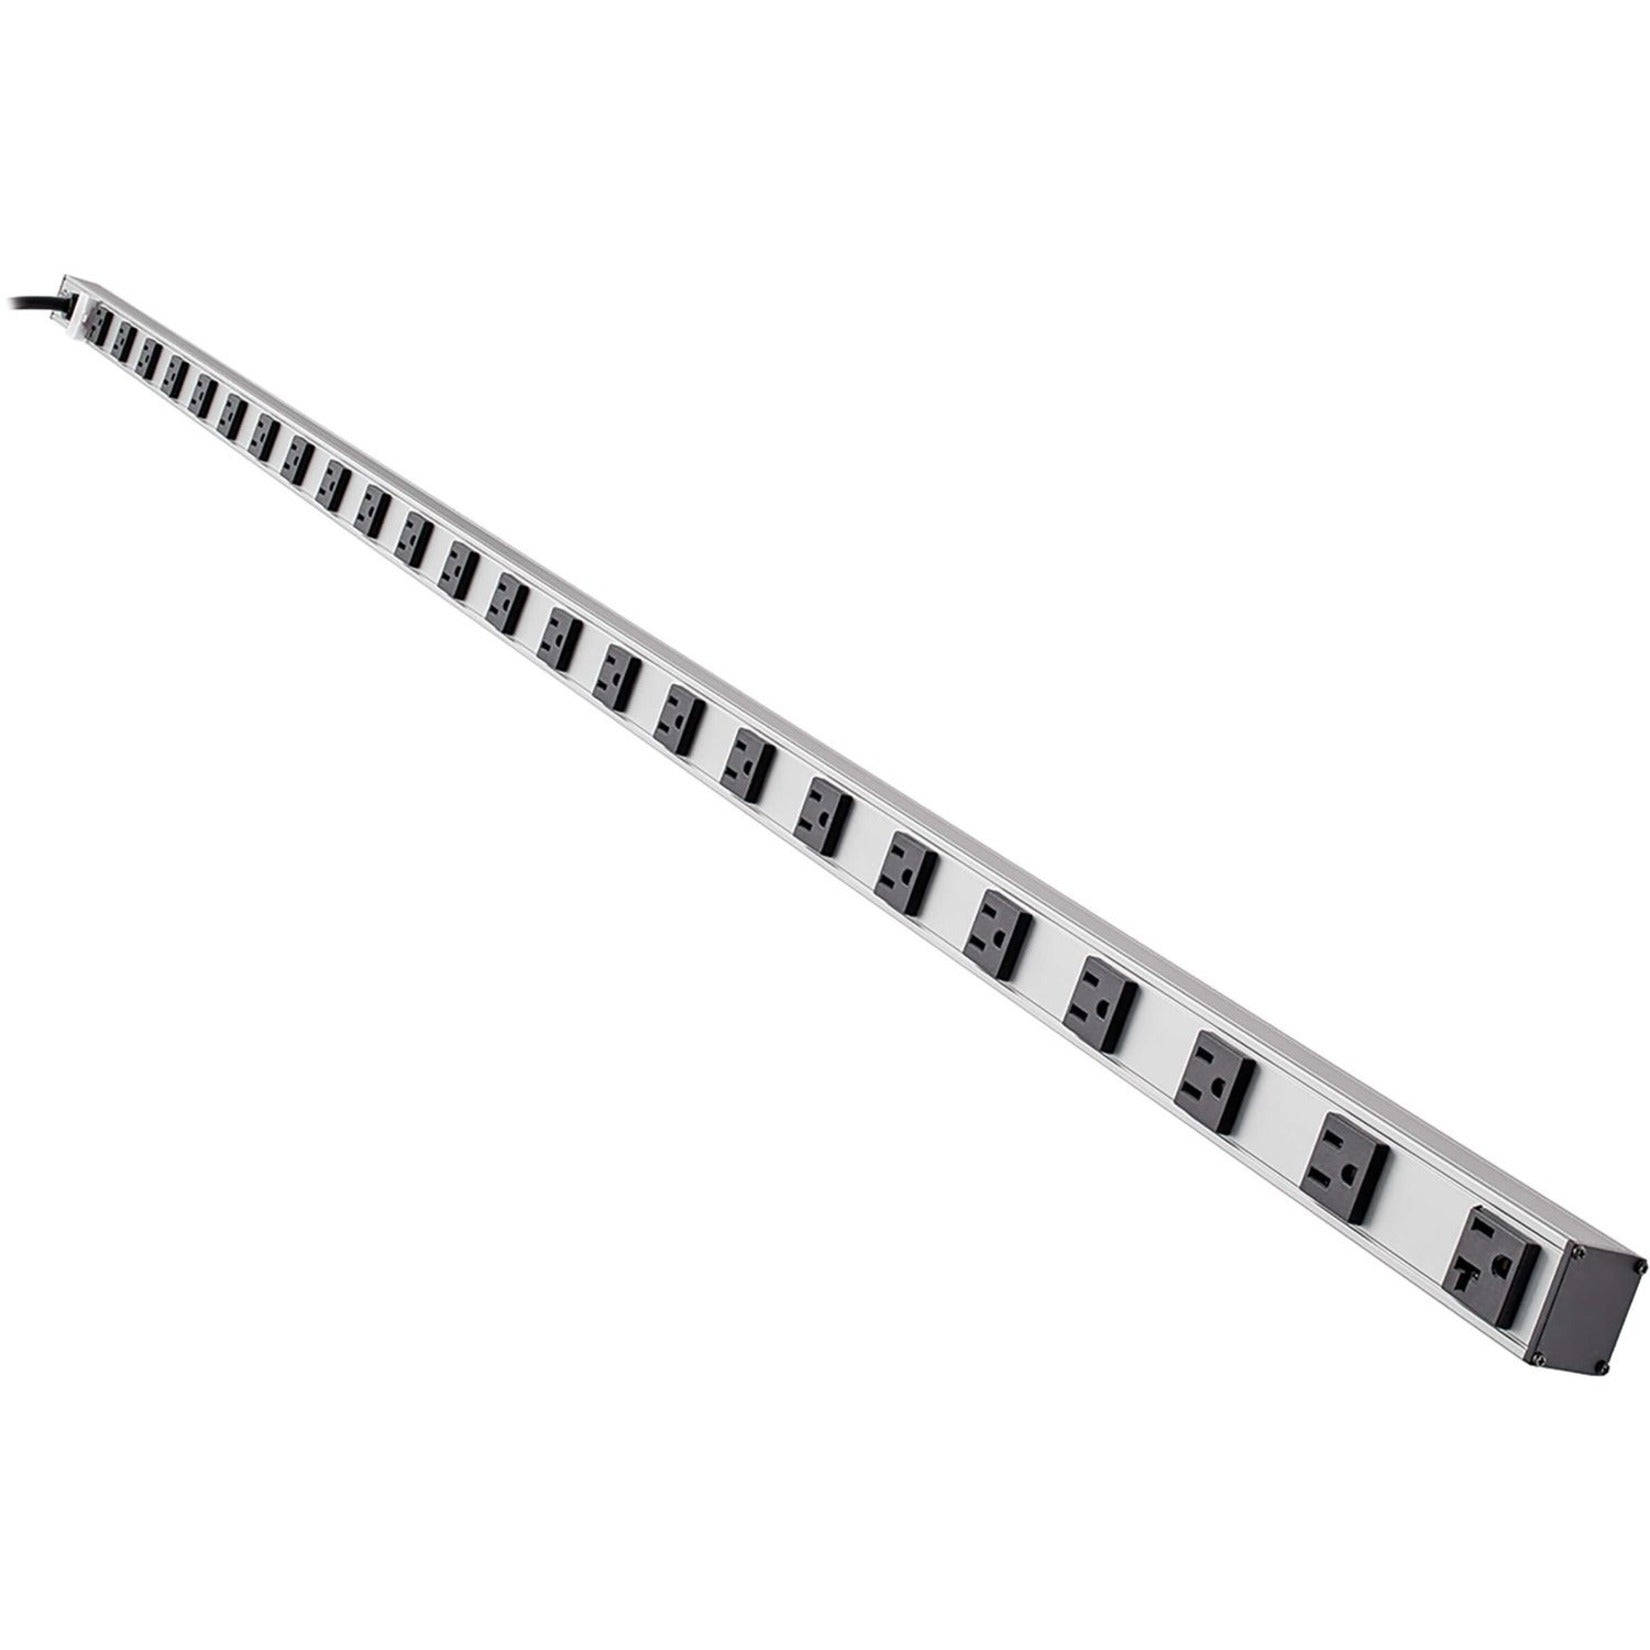 Tripp Lite PS7224-20T Power Strip 120V AC, 24 Outlet Strip, 20 Amp, 15ft Cord, 72in Length, Locking Plug